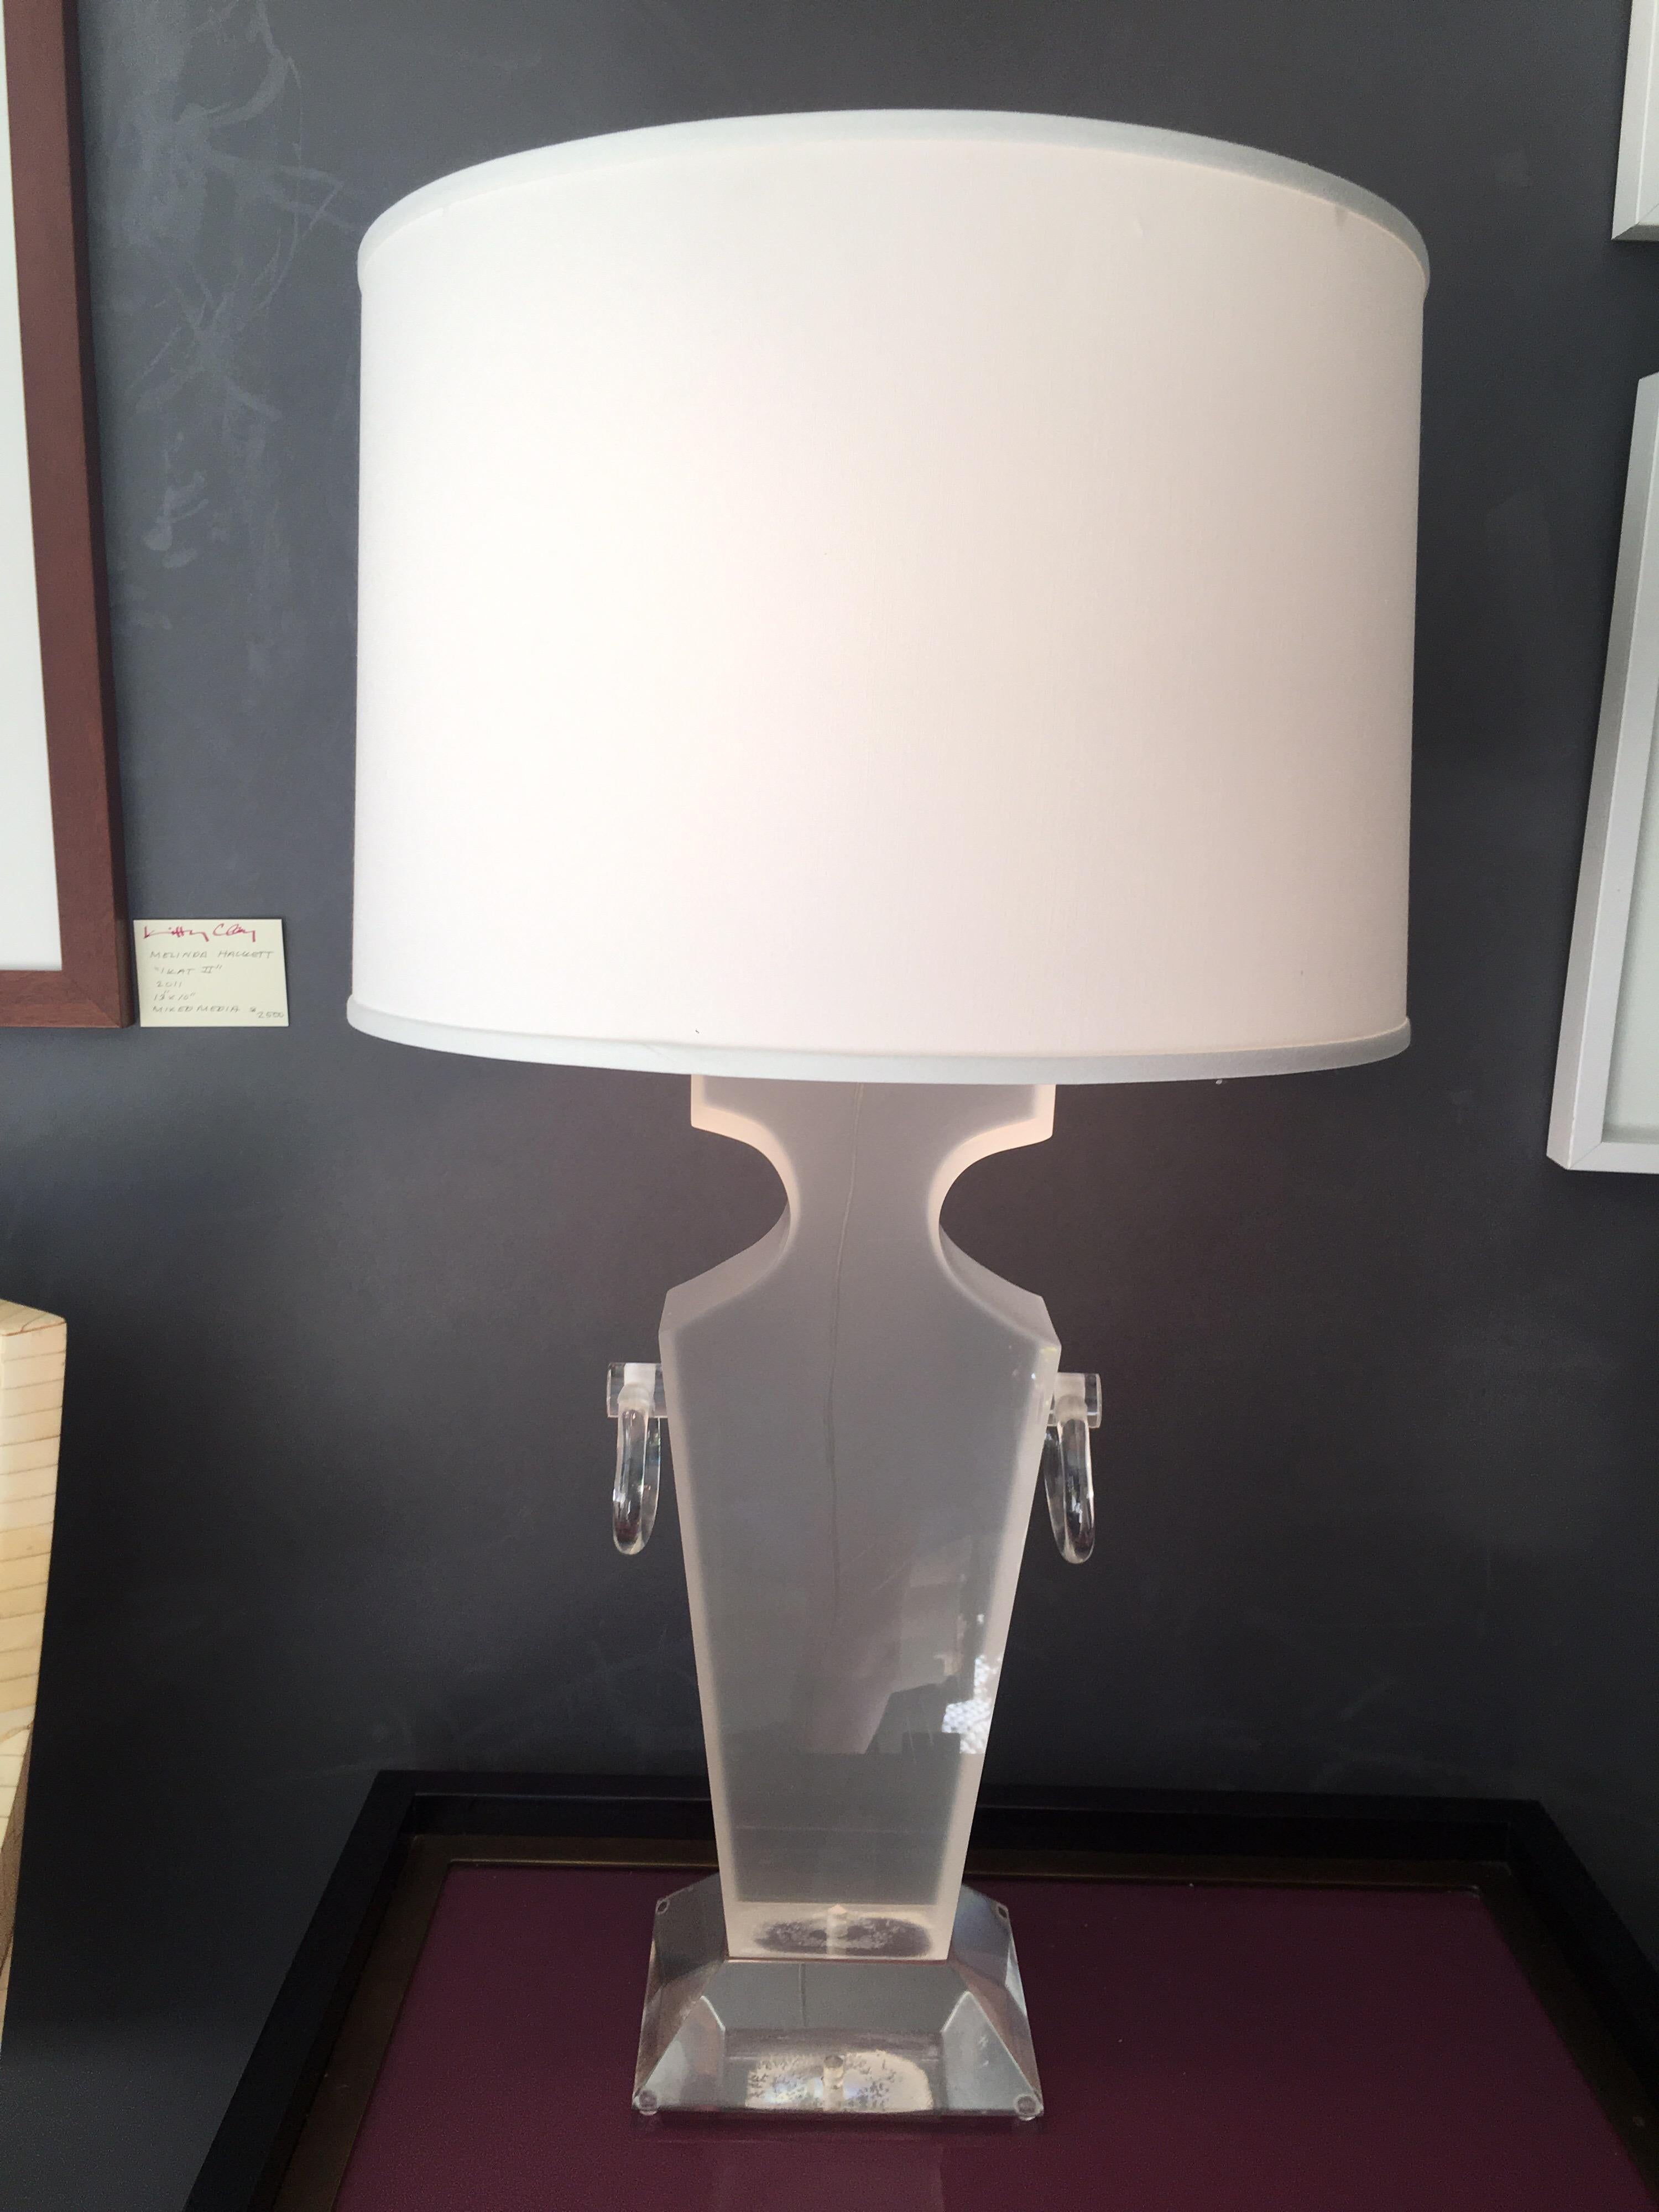 Beautiful Lucite urn shaped lamp. (A second one is available but missing the chrome adjustable part which holds the shade).
New drum shade comes with lamp unless otherwise advised.
Measures: 7.5